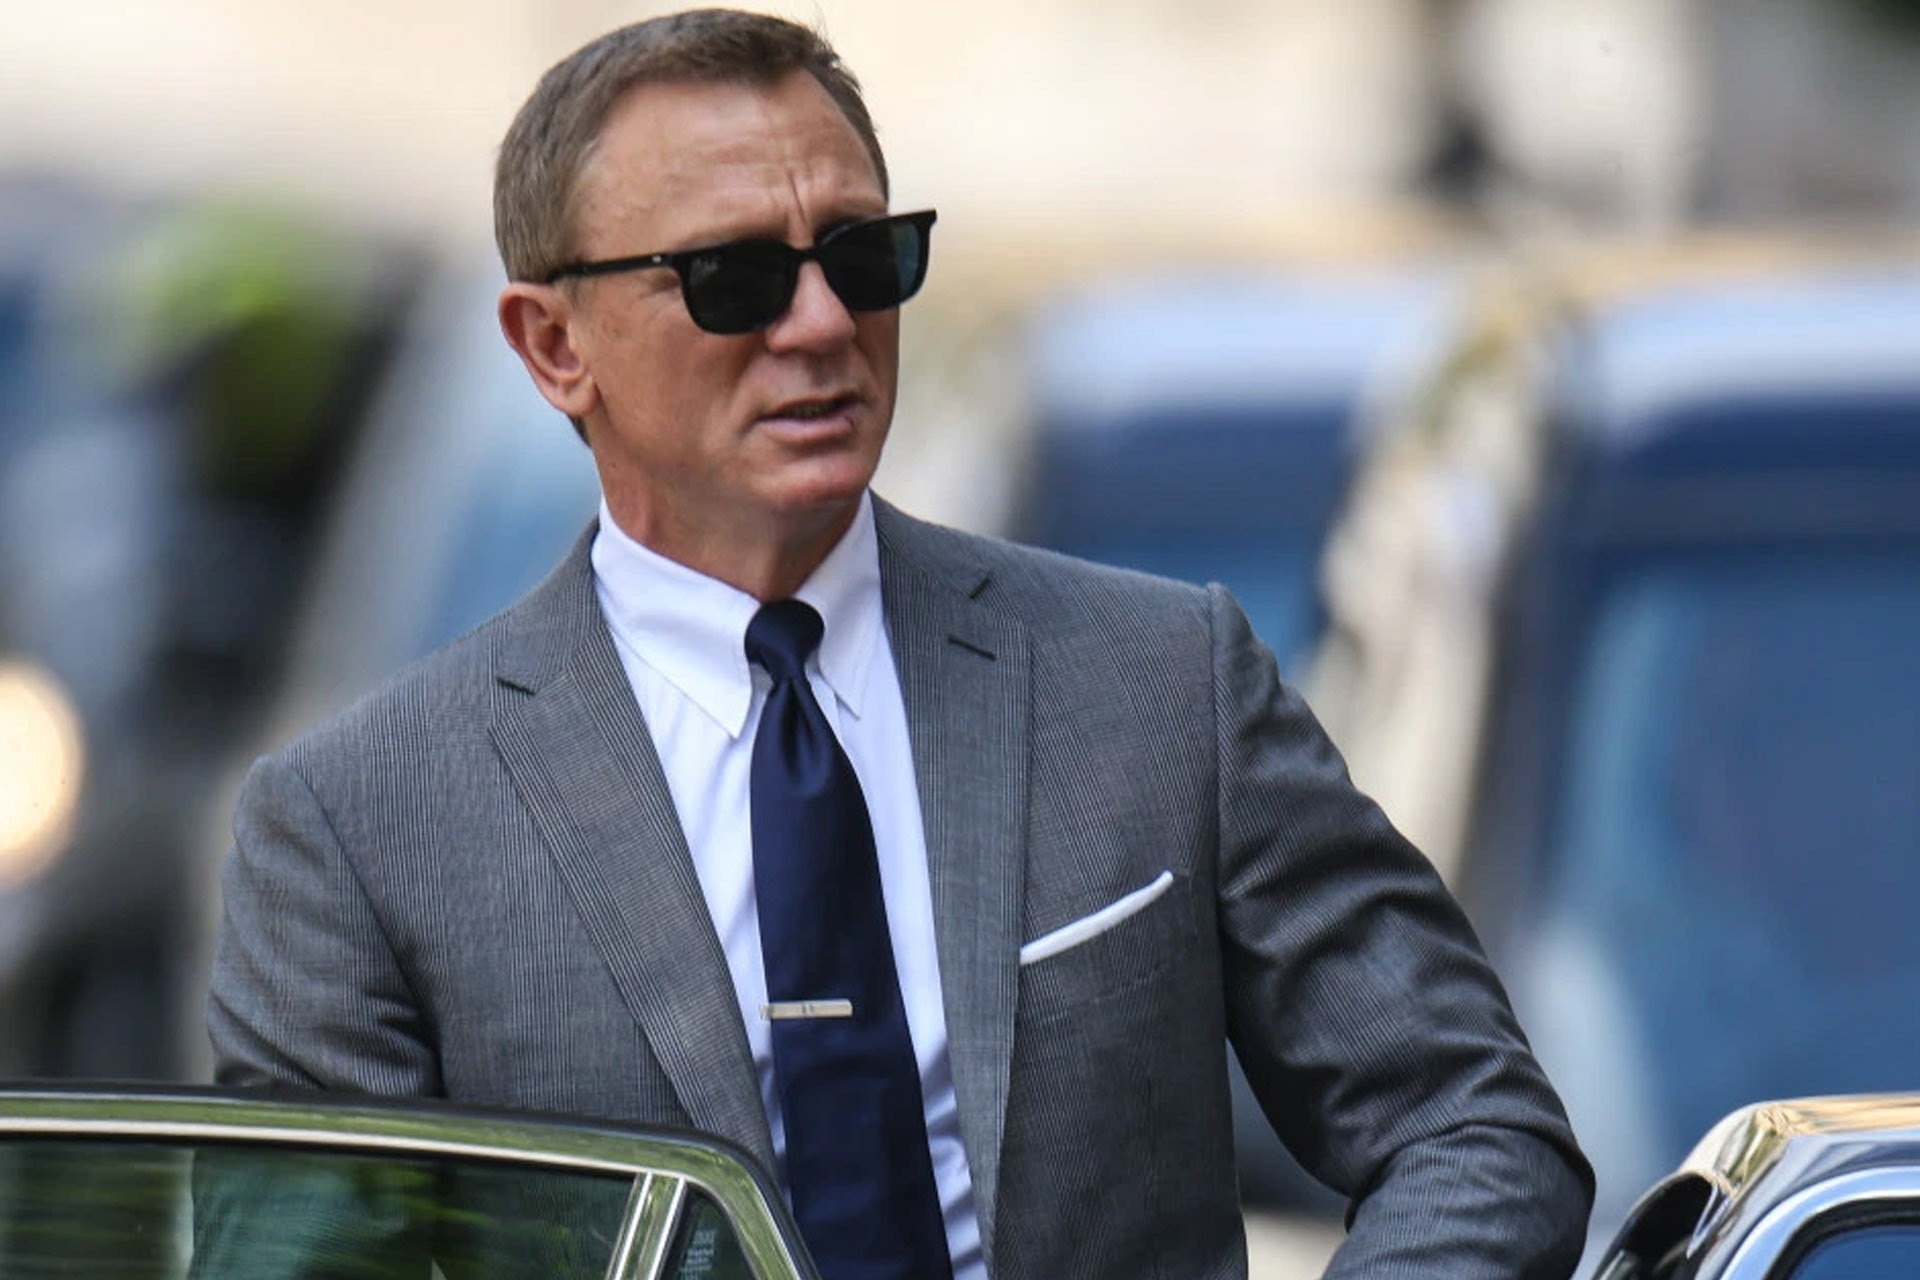 The New James Bond Movie Isn't Out Yet—But We Already Know 007's ...